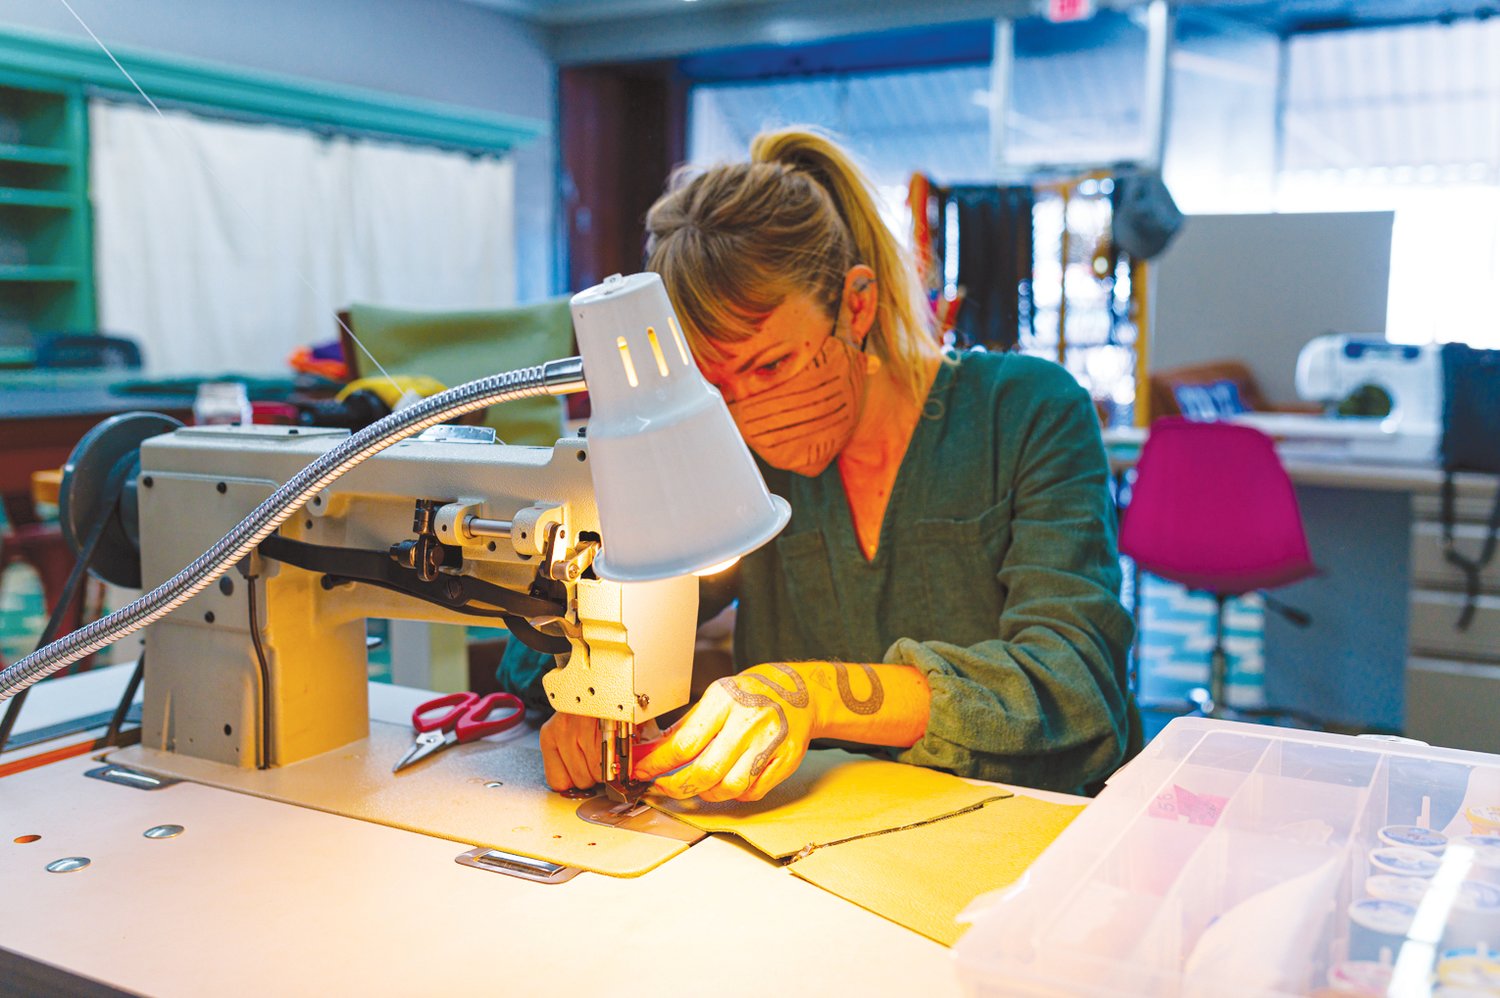 The Alliance offers more than just offices and desks. It permits craftspeople like Julia Marina, owner of Milestone Bag co., to make their products without the expense of a private shop.